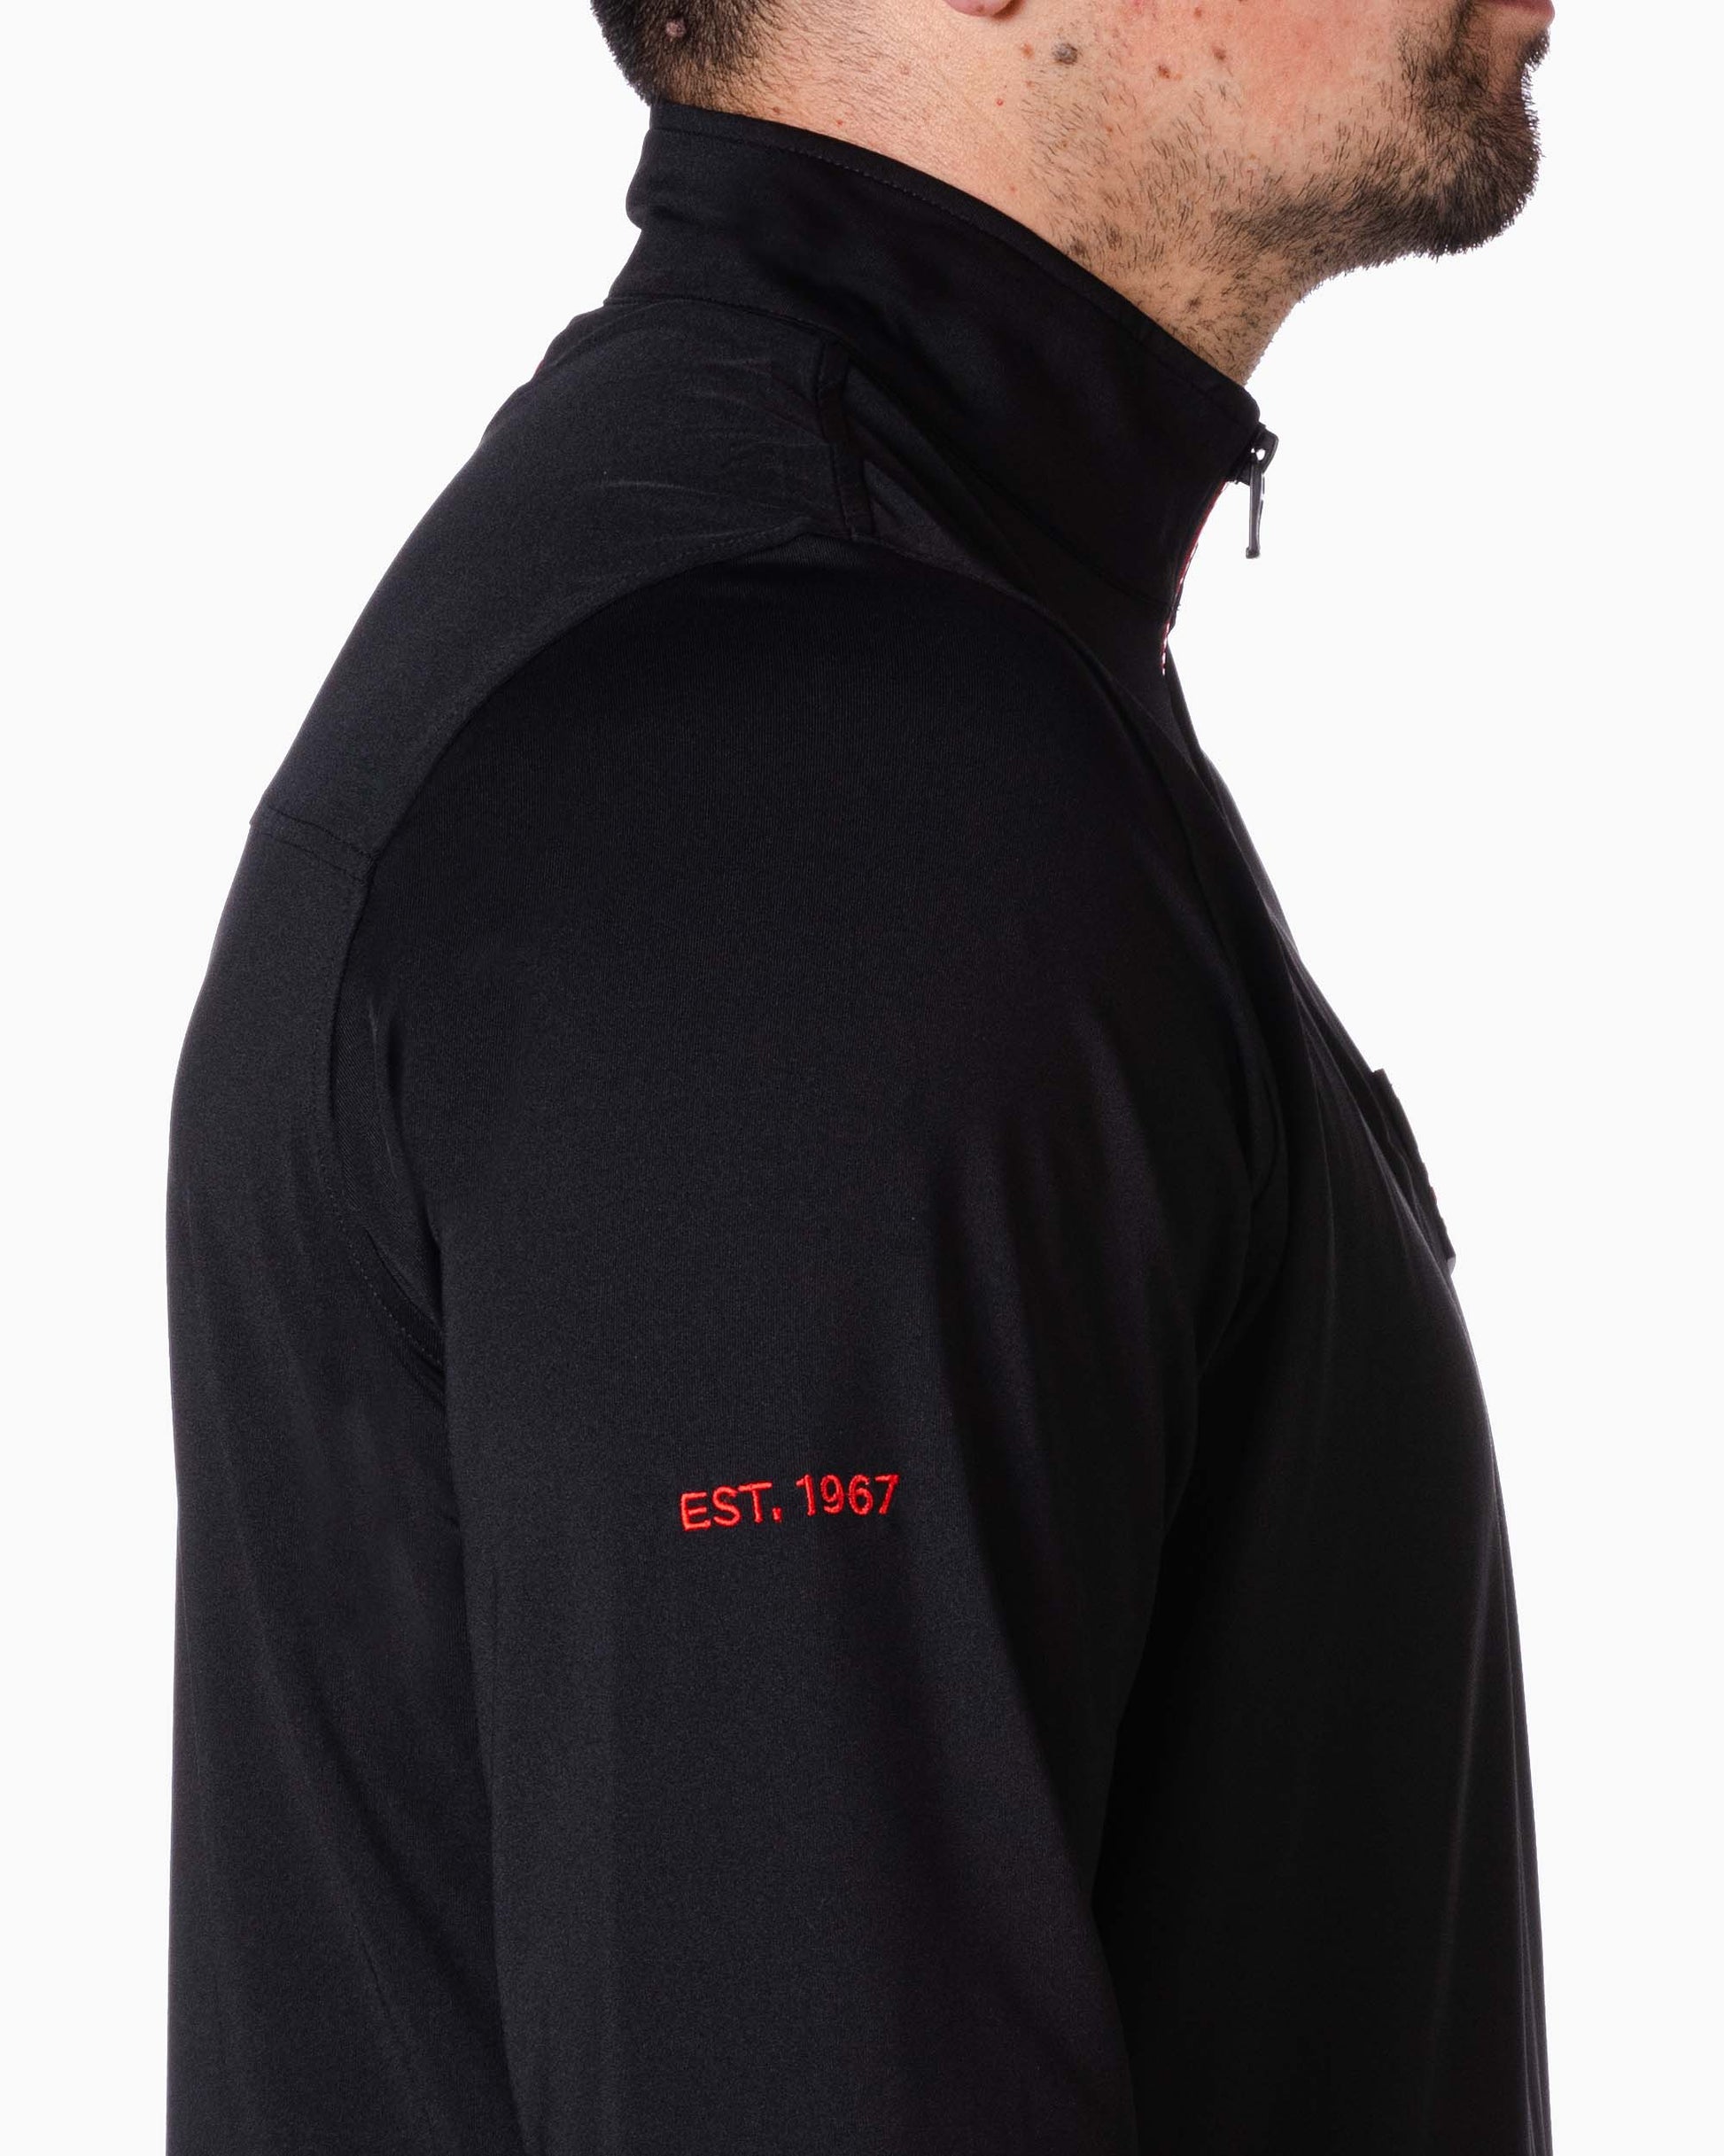 close up of sleeve with embroidered red "est. 1967"